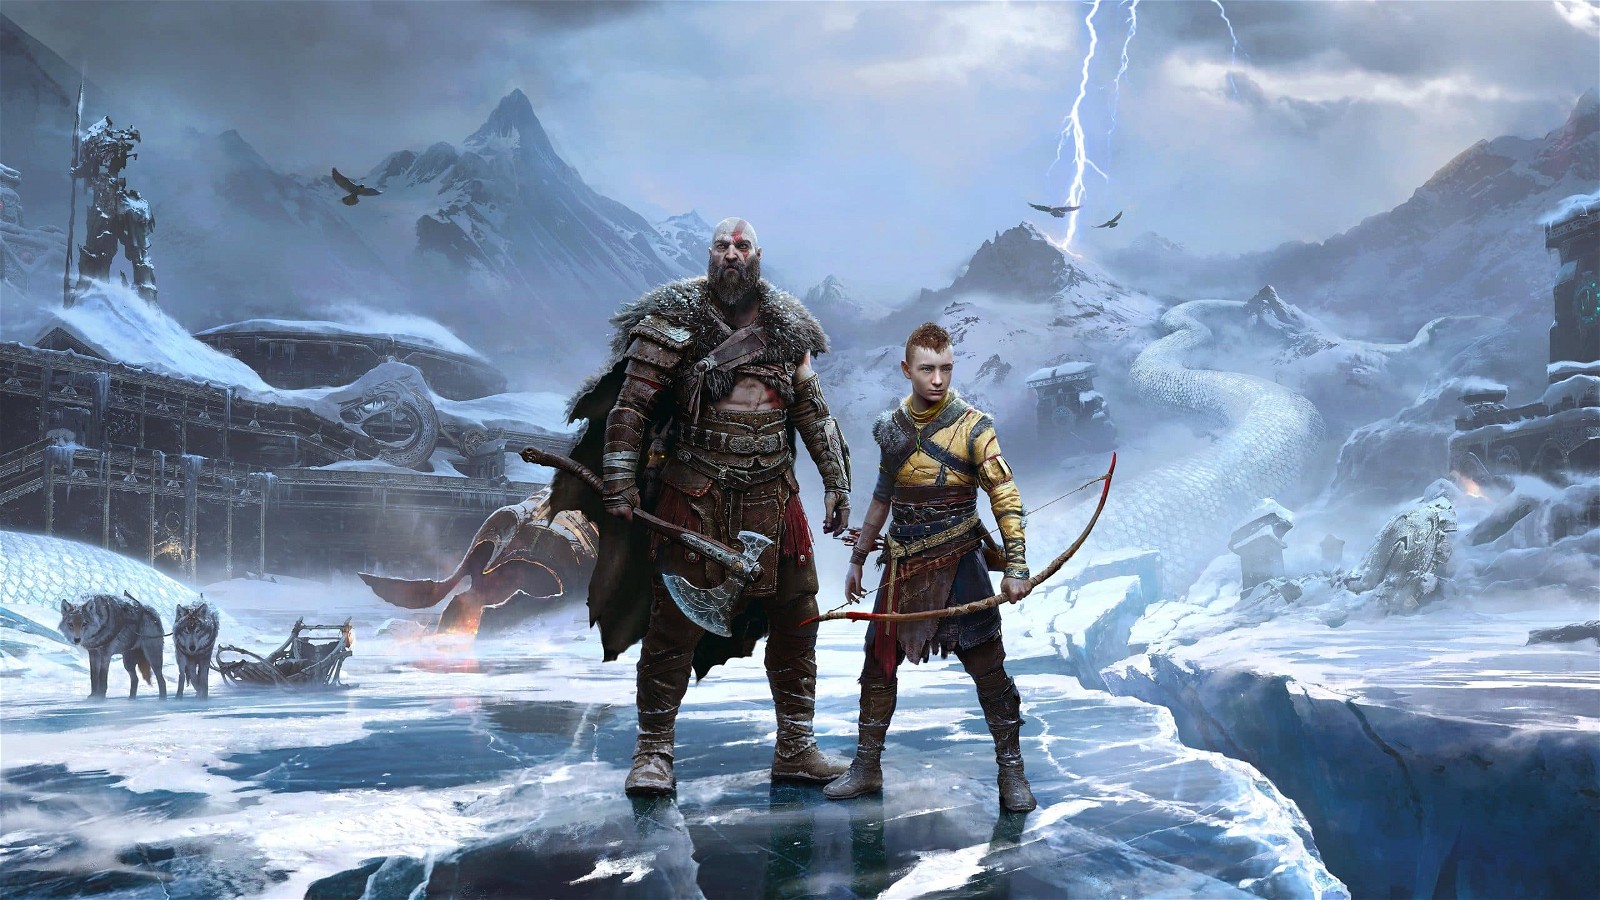 A God of War project is allegedly in development.